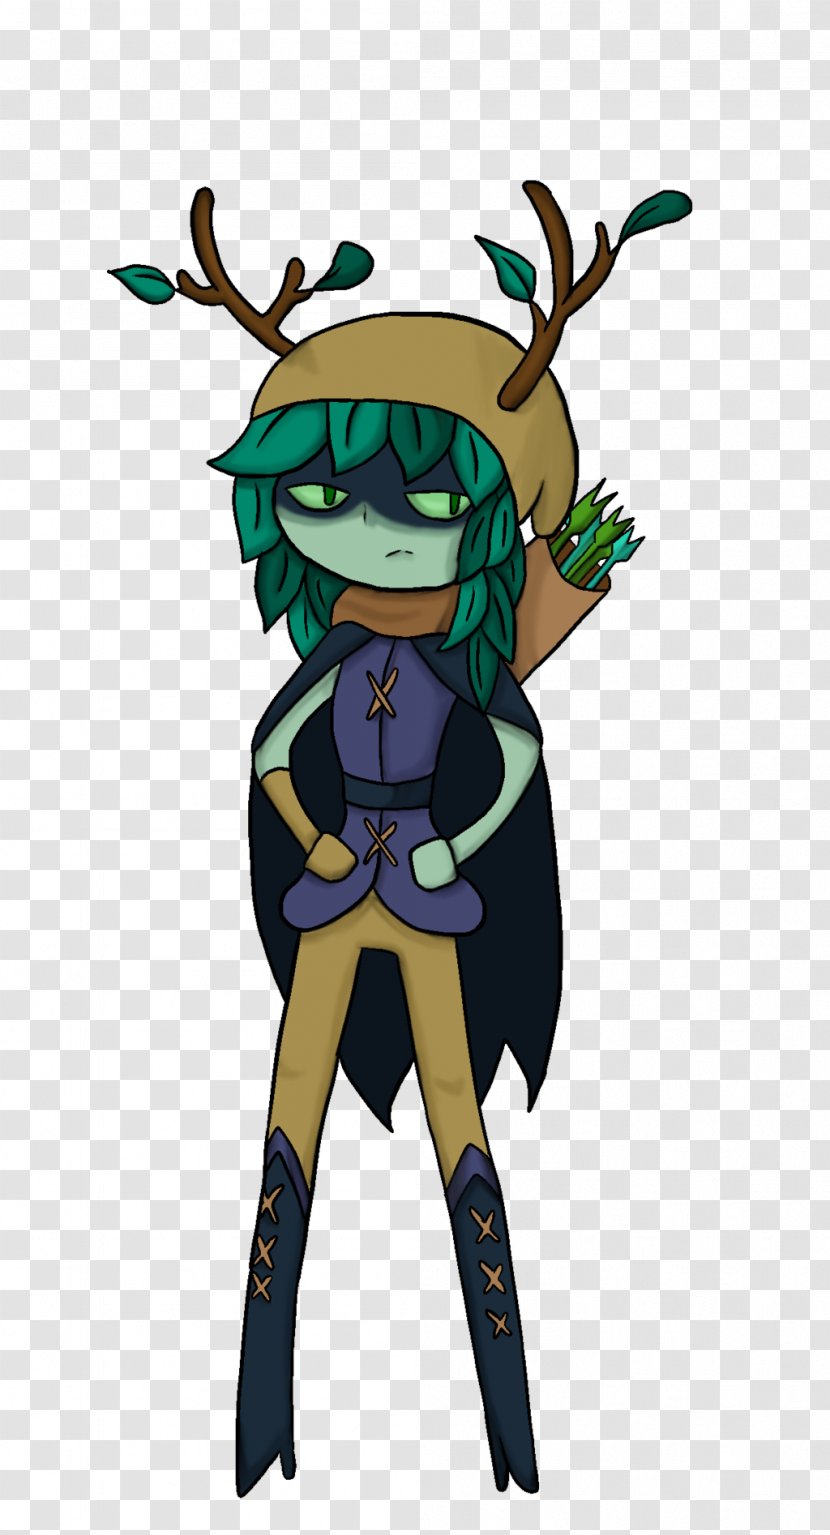 Huntress Wizard Marceline The Vampire Queen Finn Human Ice King Flame Princess Costume Transparent Png